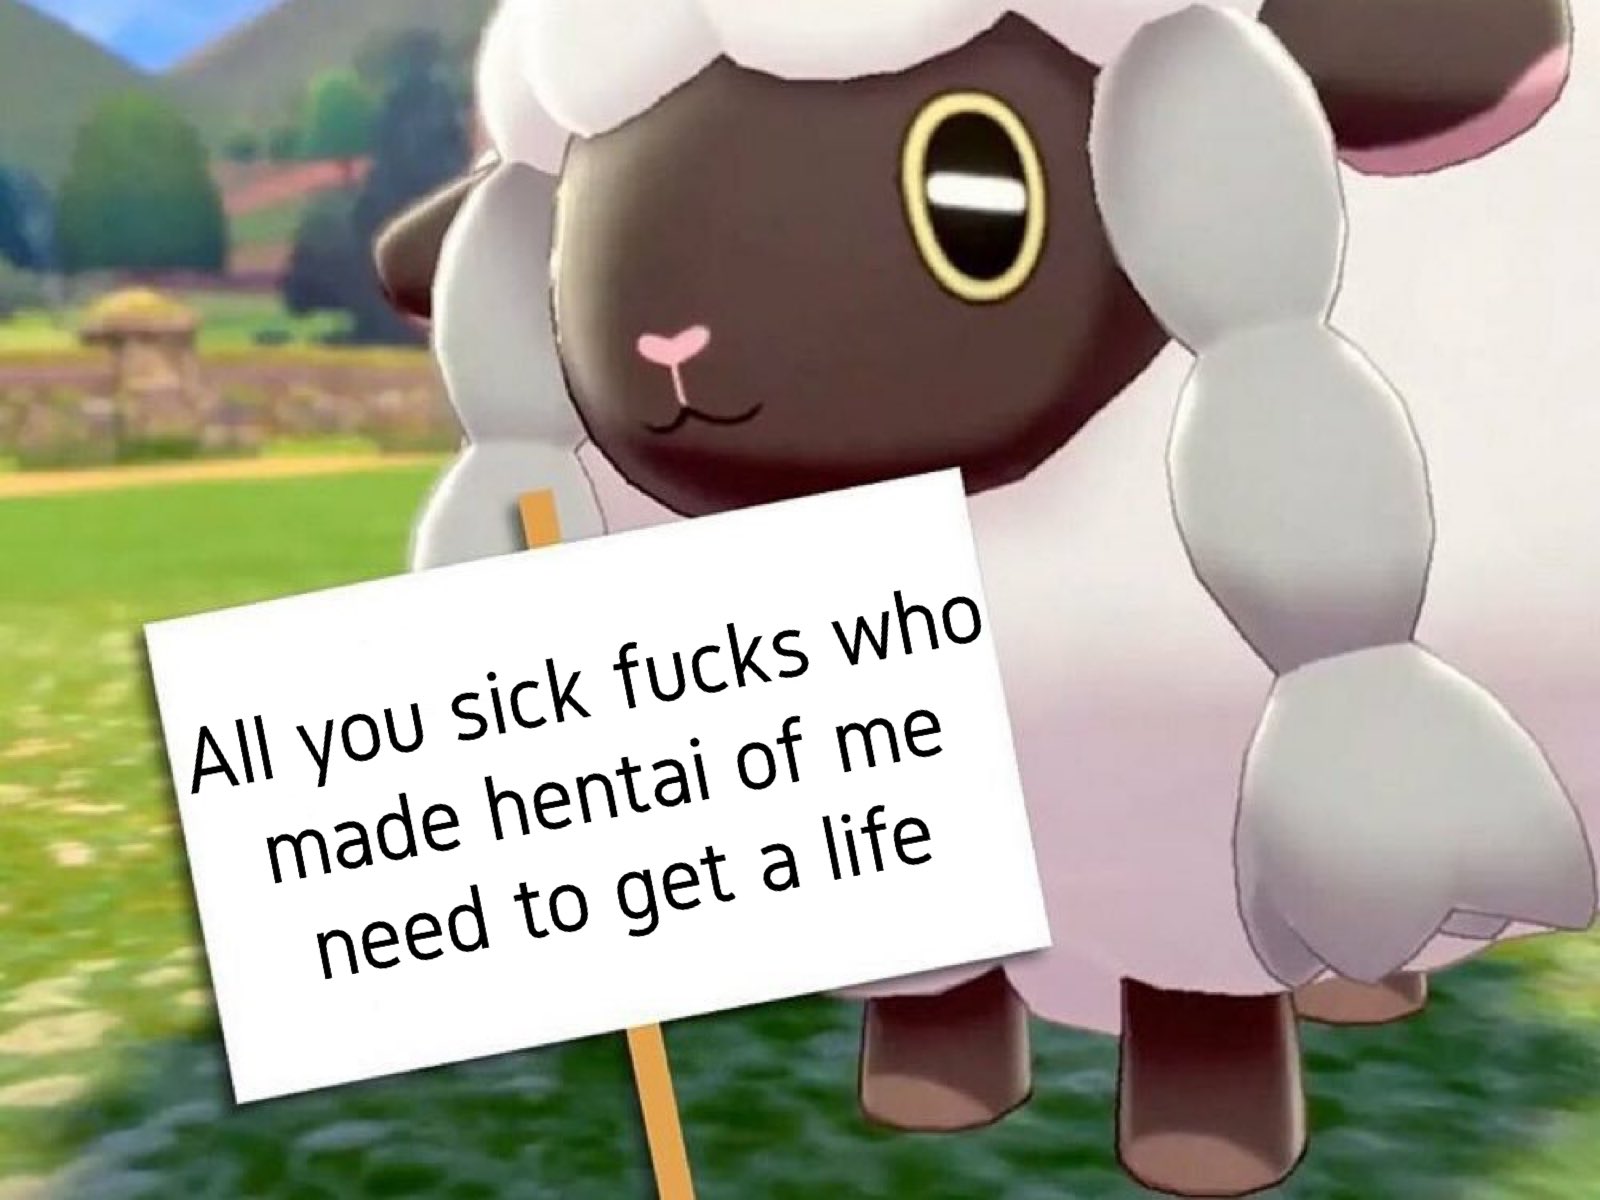 wooloo memes about Pokémon Sword and Shield - All you sick fucks who made hentai of me need to get a life